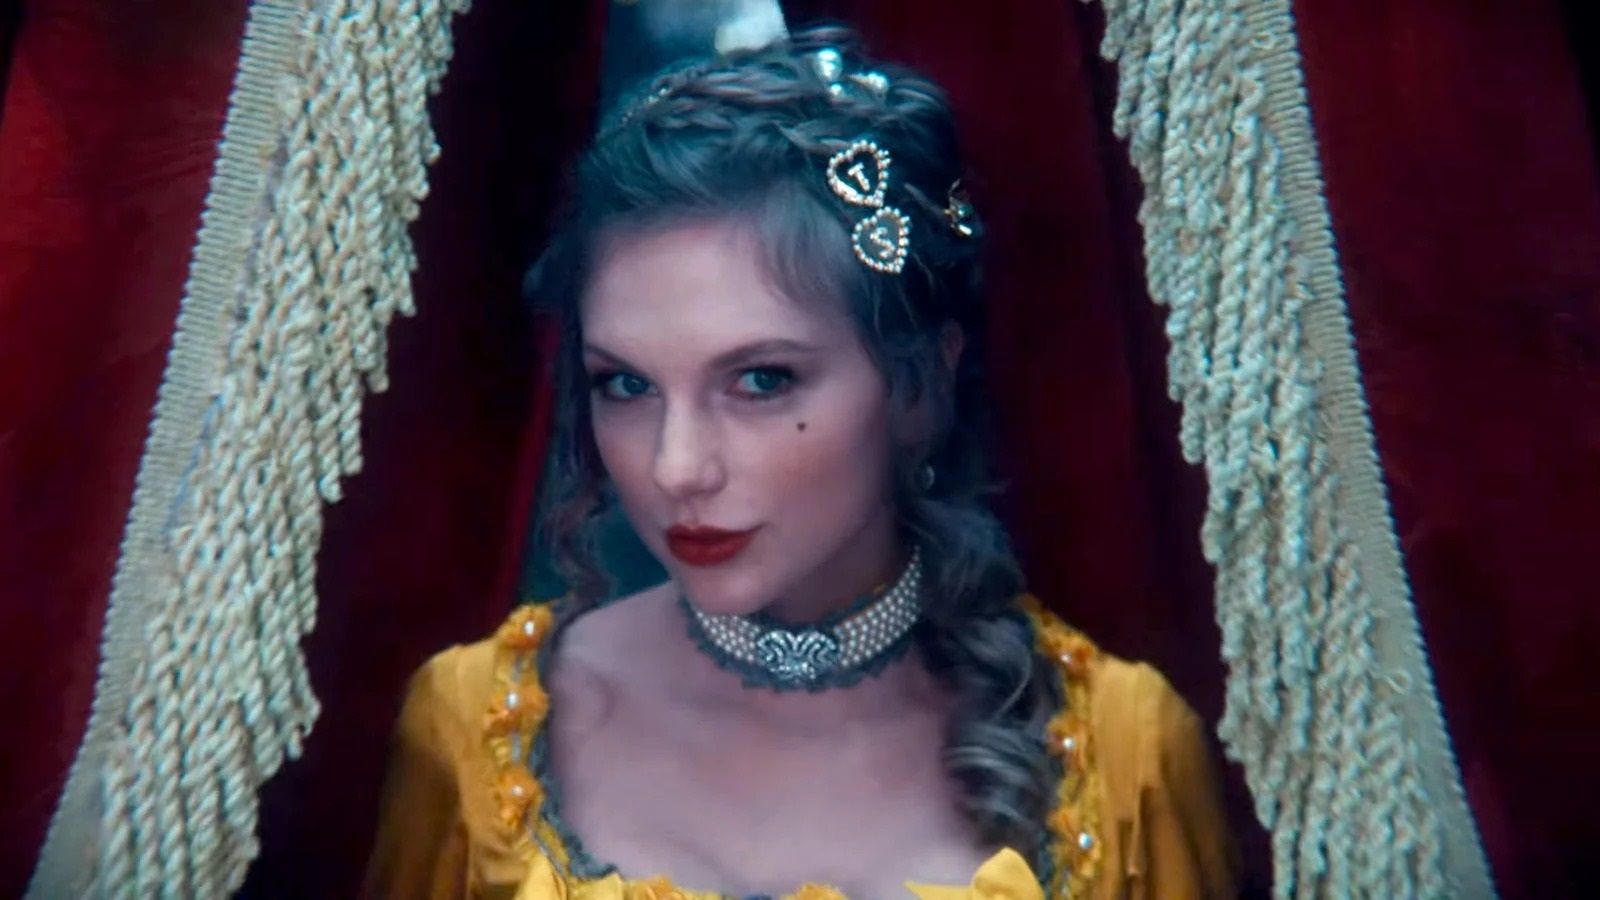 Taylor Swift in her Bejeweled Music Video From her Album Midnights